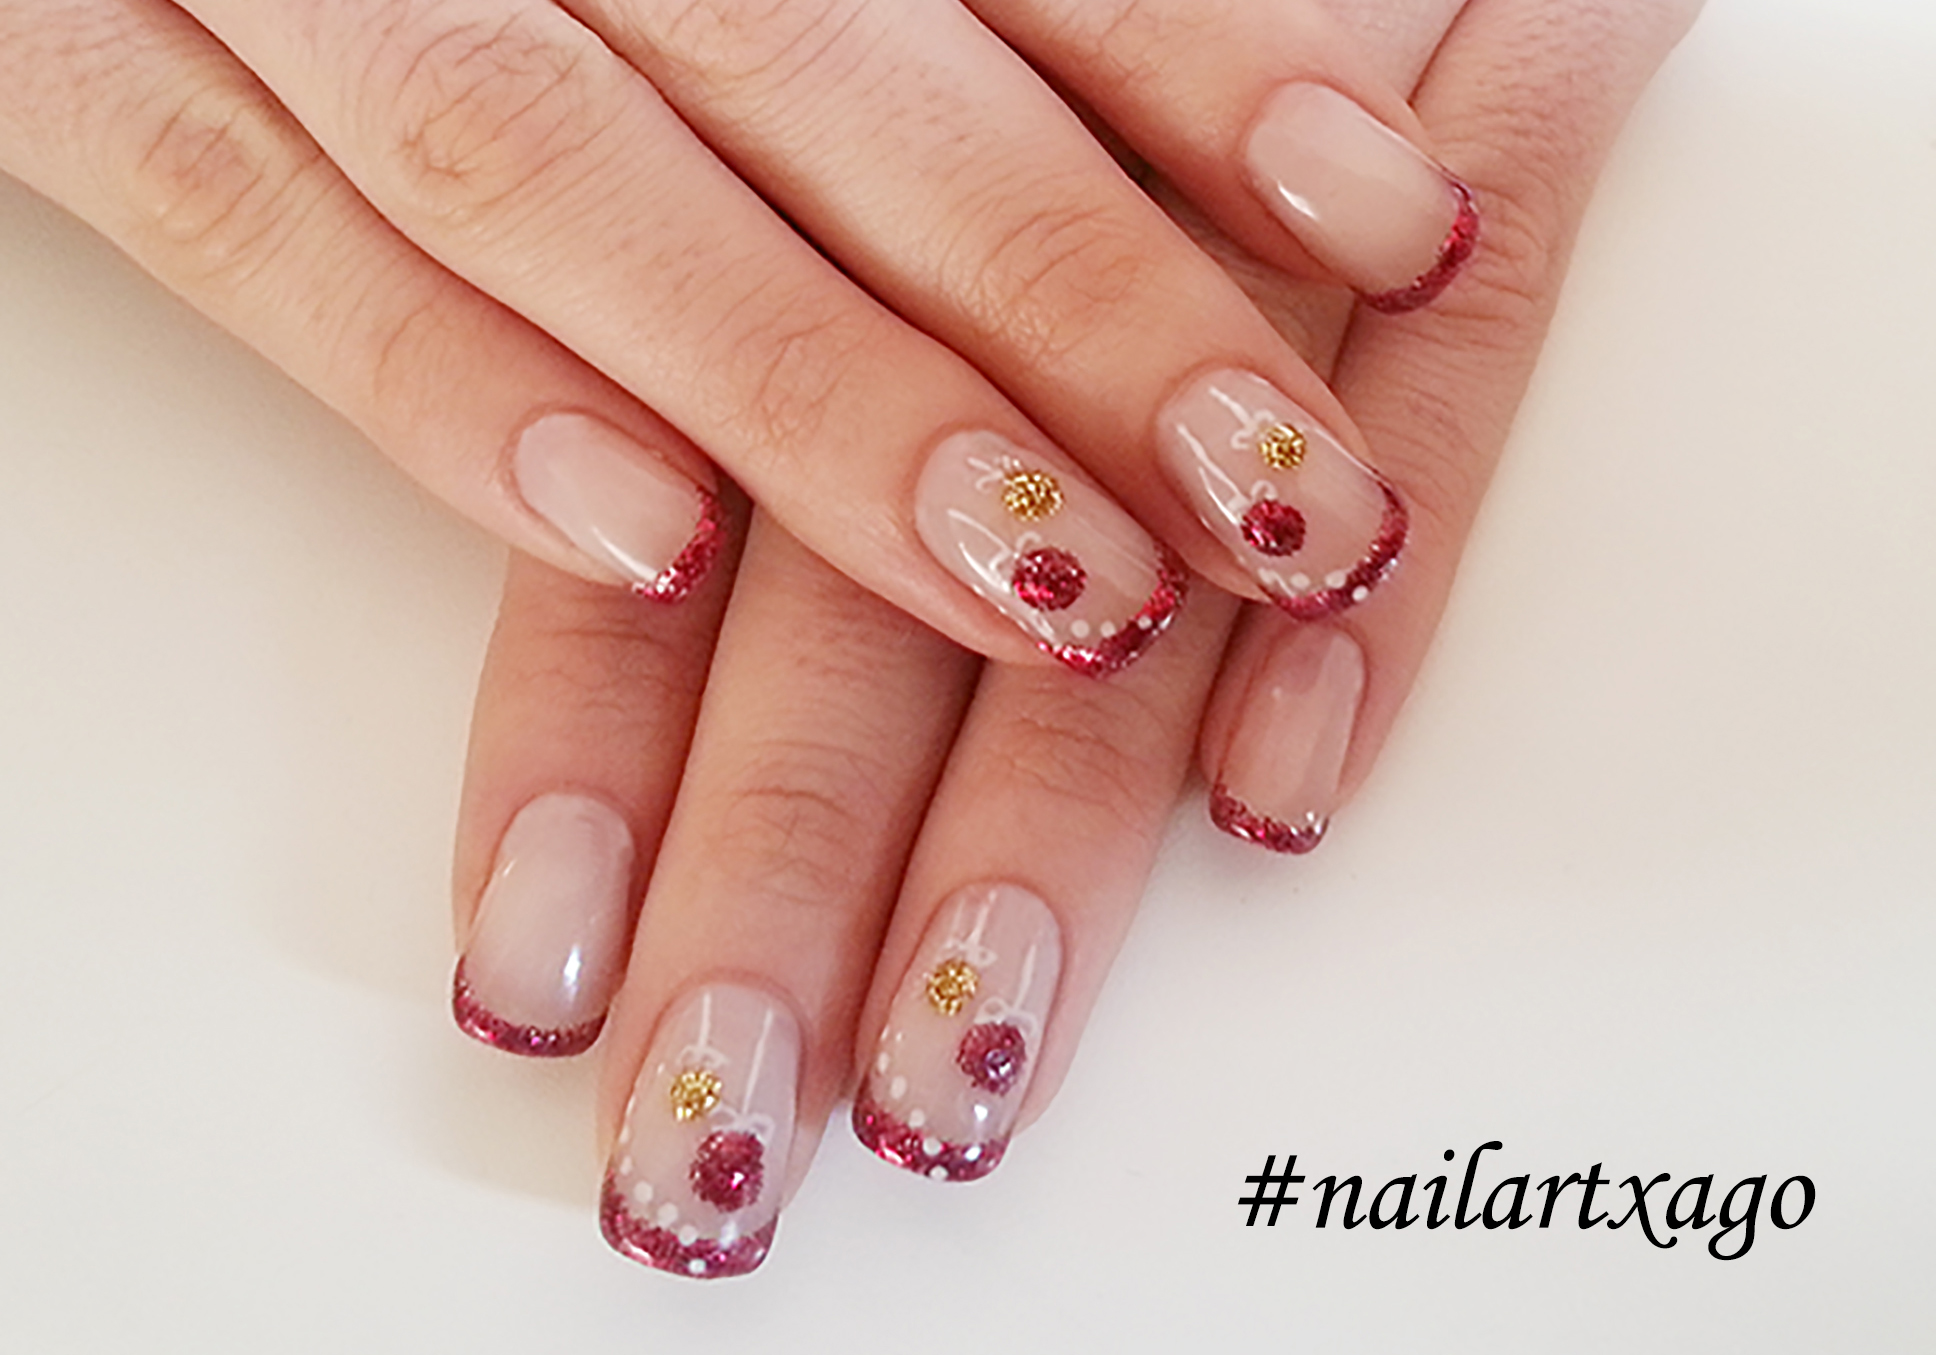 5. The Best Nail Art Videos on Instagram: Follow These Accounts for Inspiration - wide 7